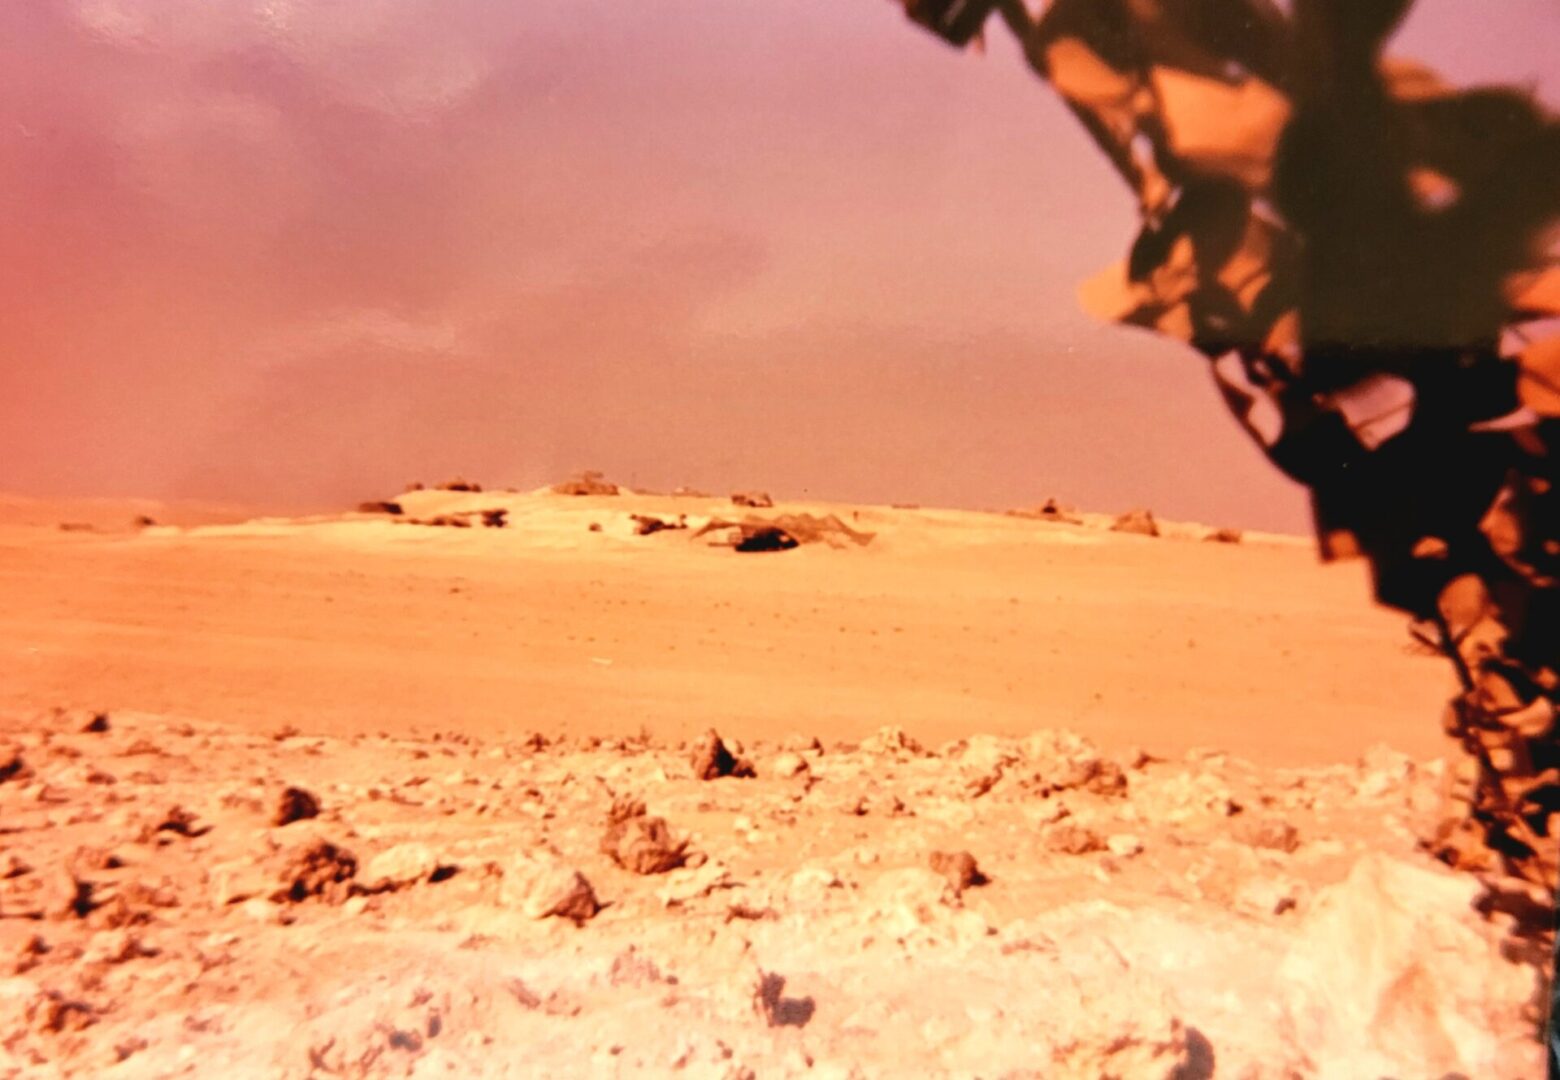 View of the Saudi desert from my fighting hole while guarding the Hawk Missle site